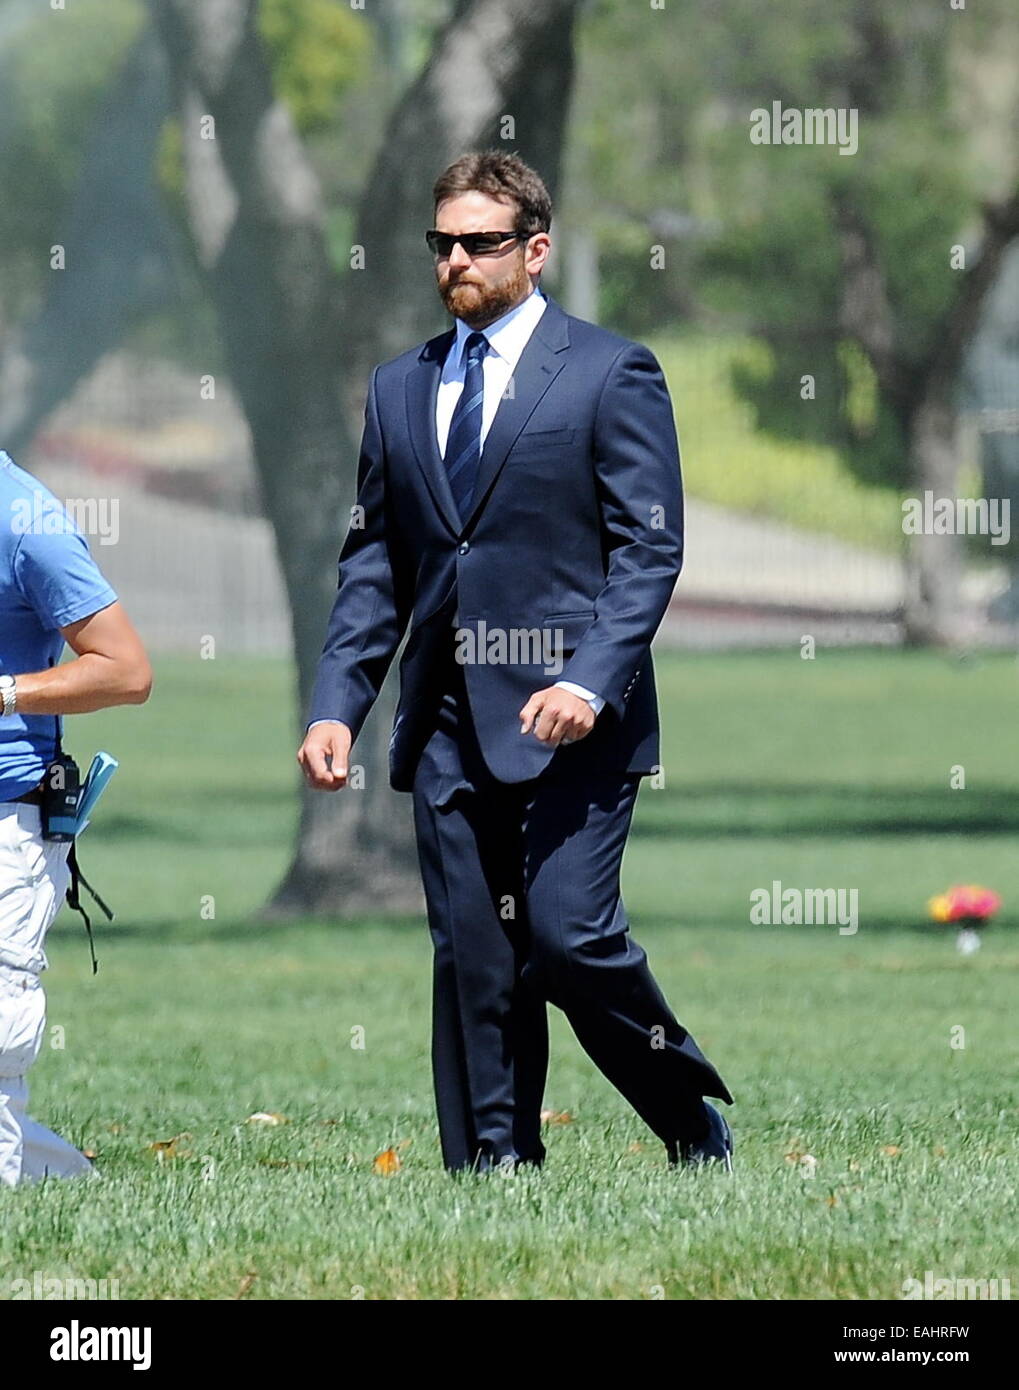 Actor Bradley Cooper puts on a suit for a funeral scene for his